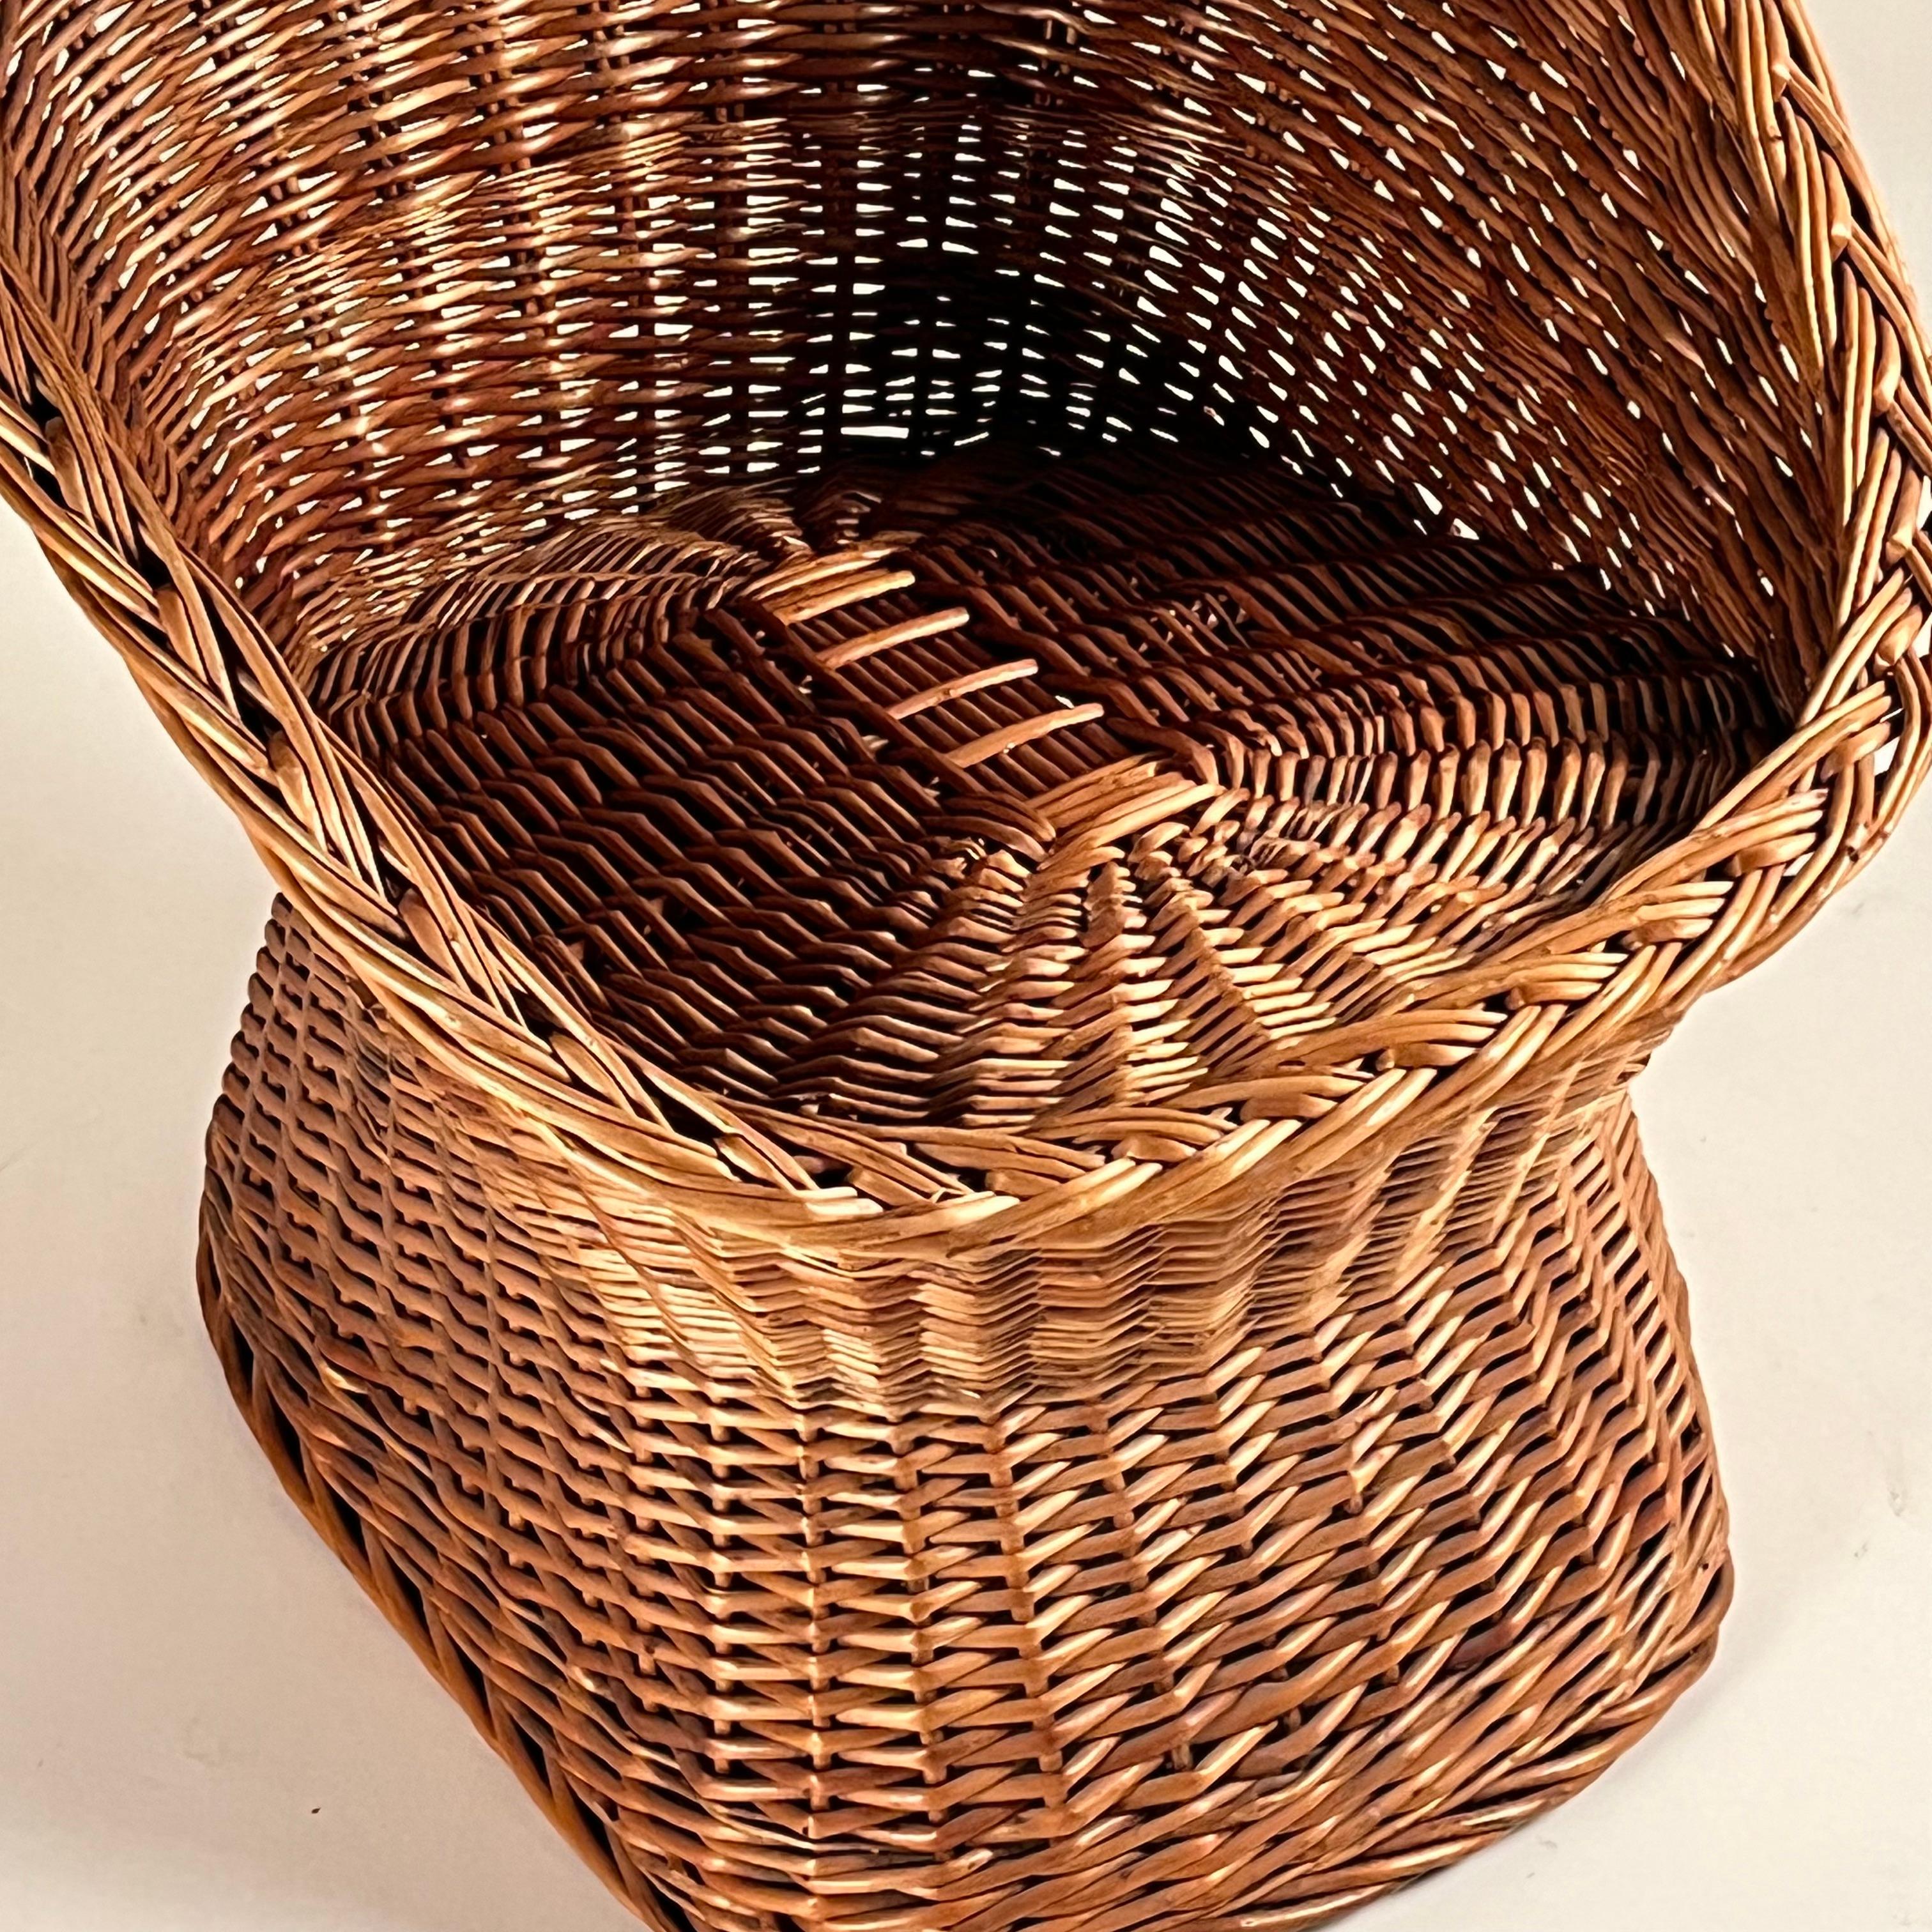 Woven Rattan Wicker Barrel Chair with Shearling Pad For Sale 3